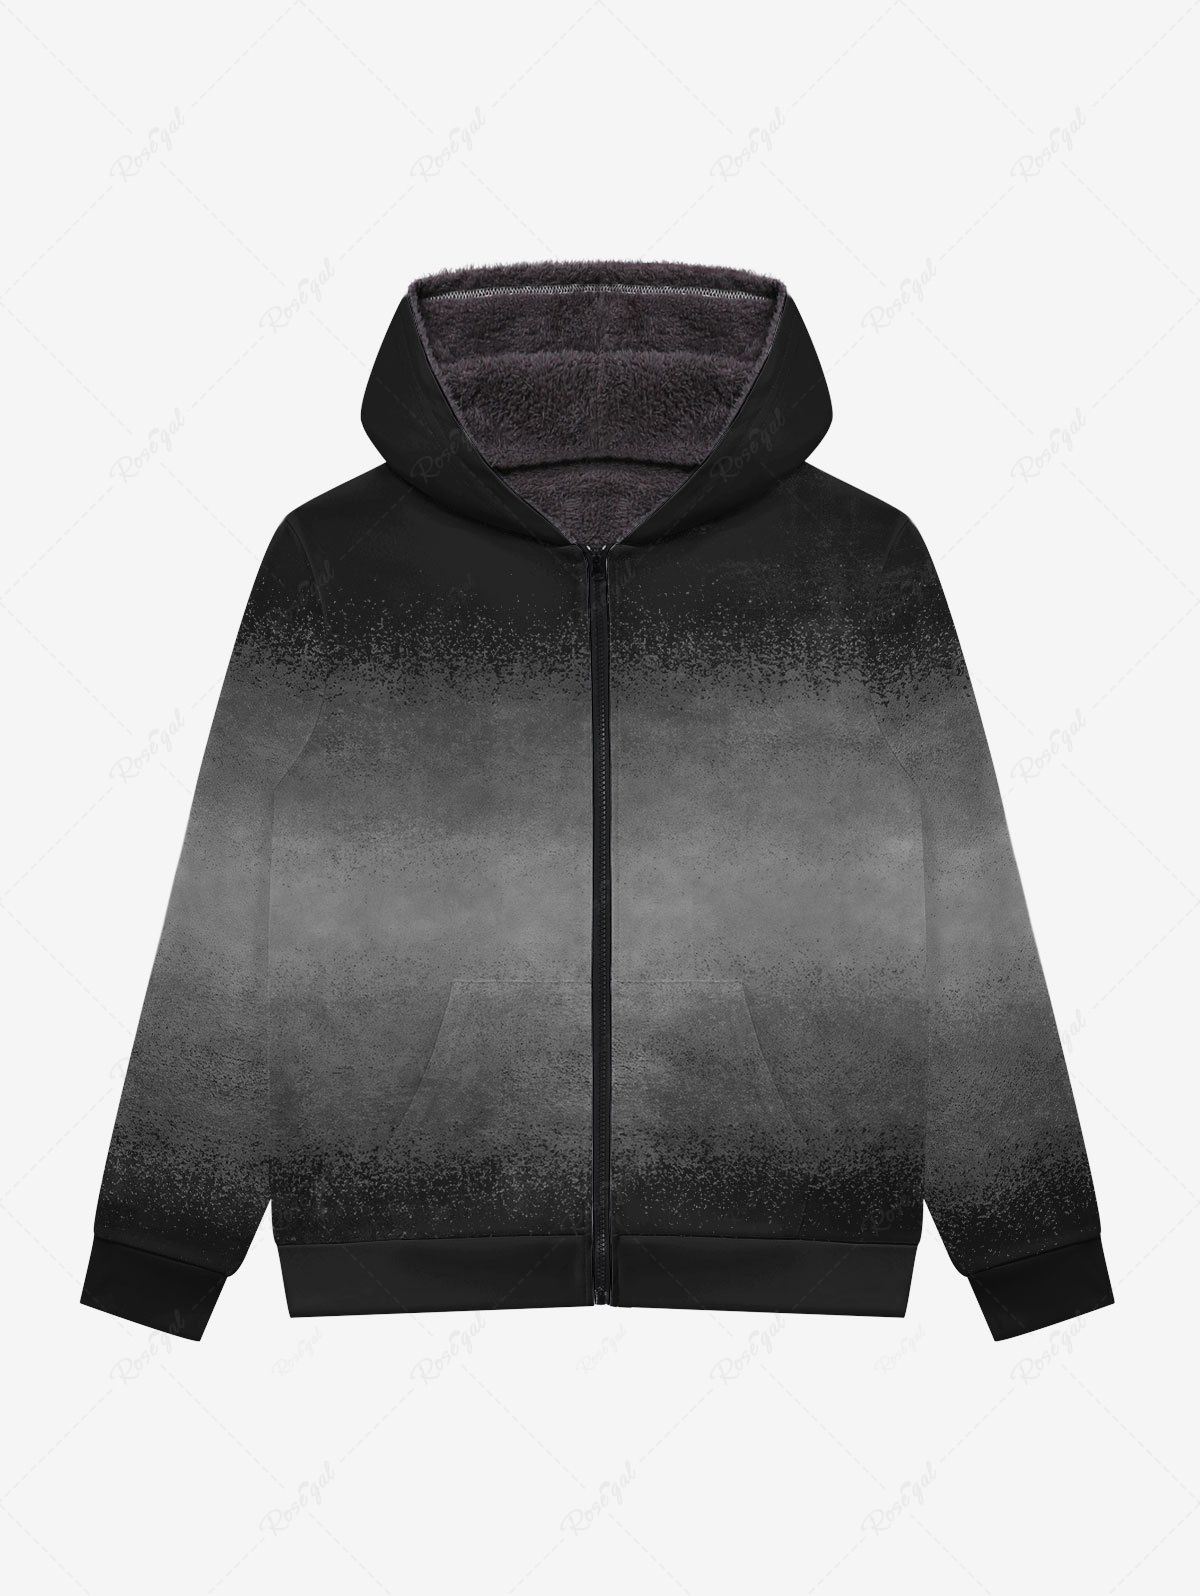 Gothic Layered Ombre Print Full Zipper Pockets Fleece Lining Hoodie For Men